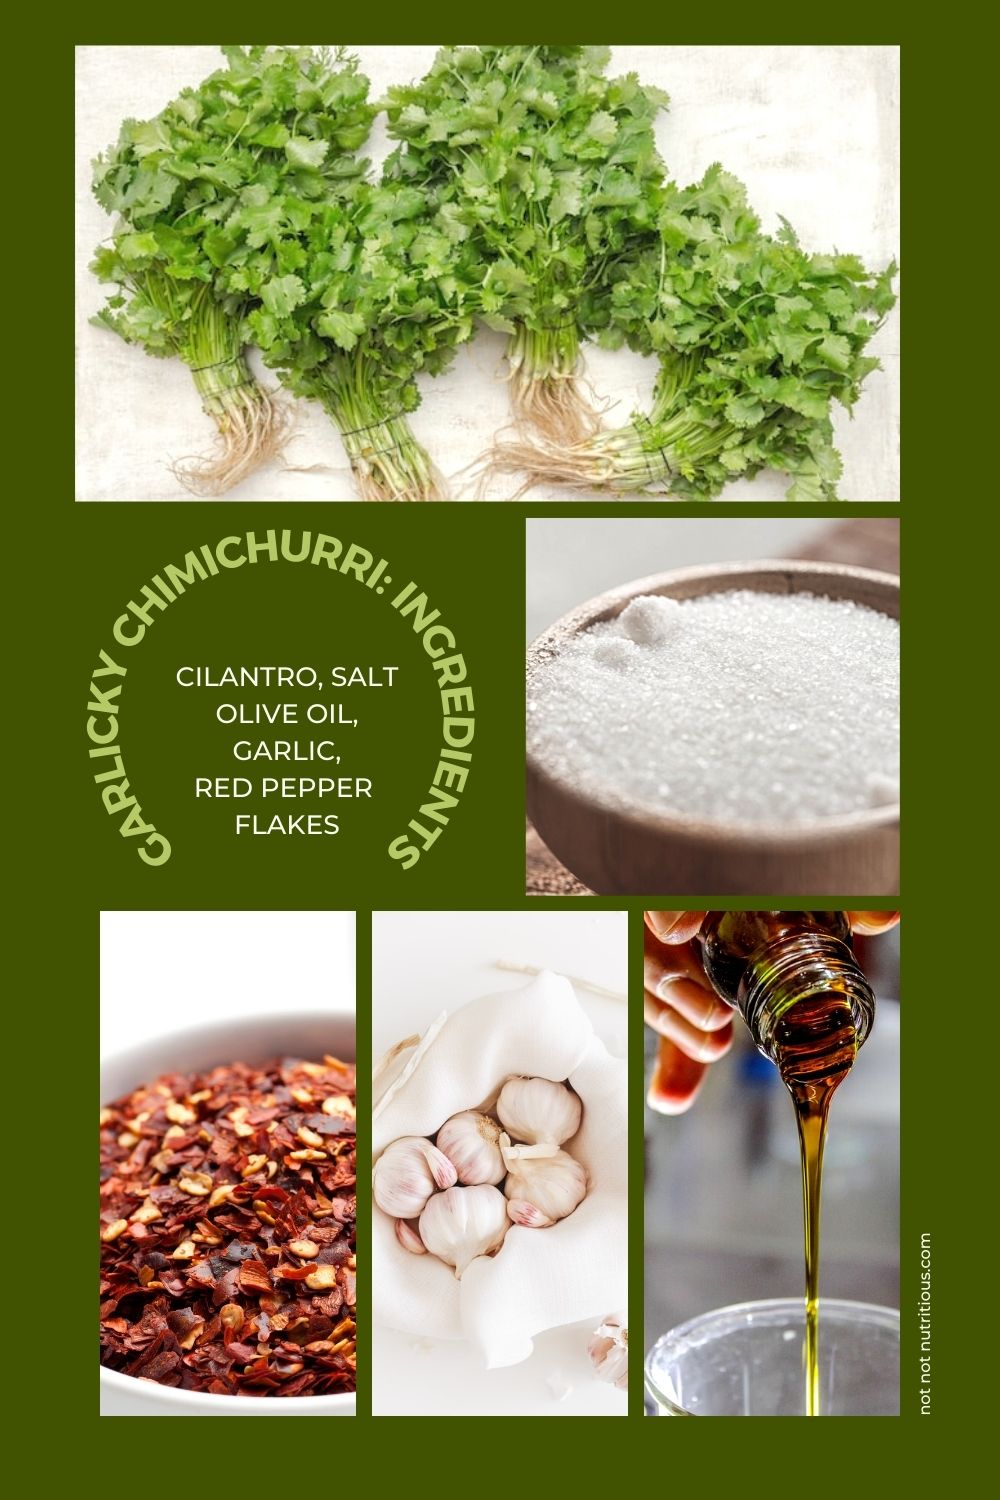 Collage of ingredients for garlicky chimchurri: cilantro, salt, olive oil, garlic, red pepper flakes